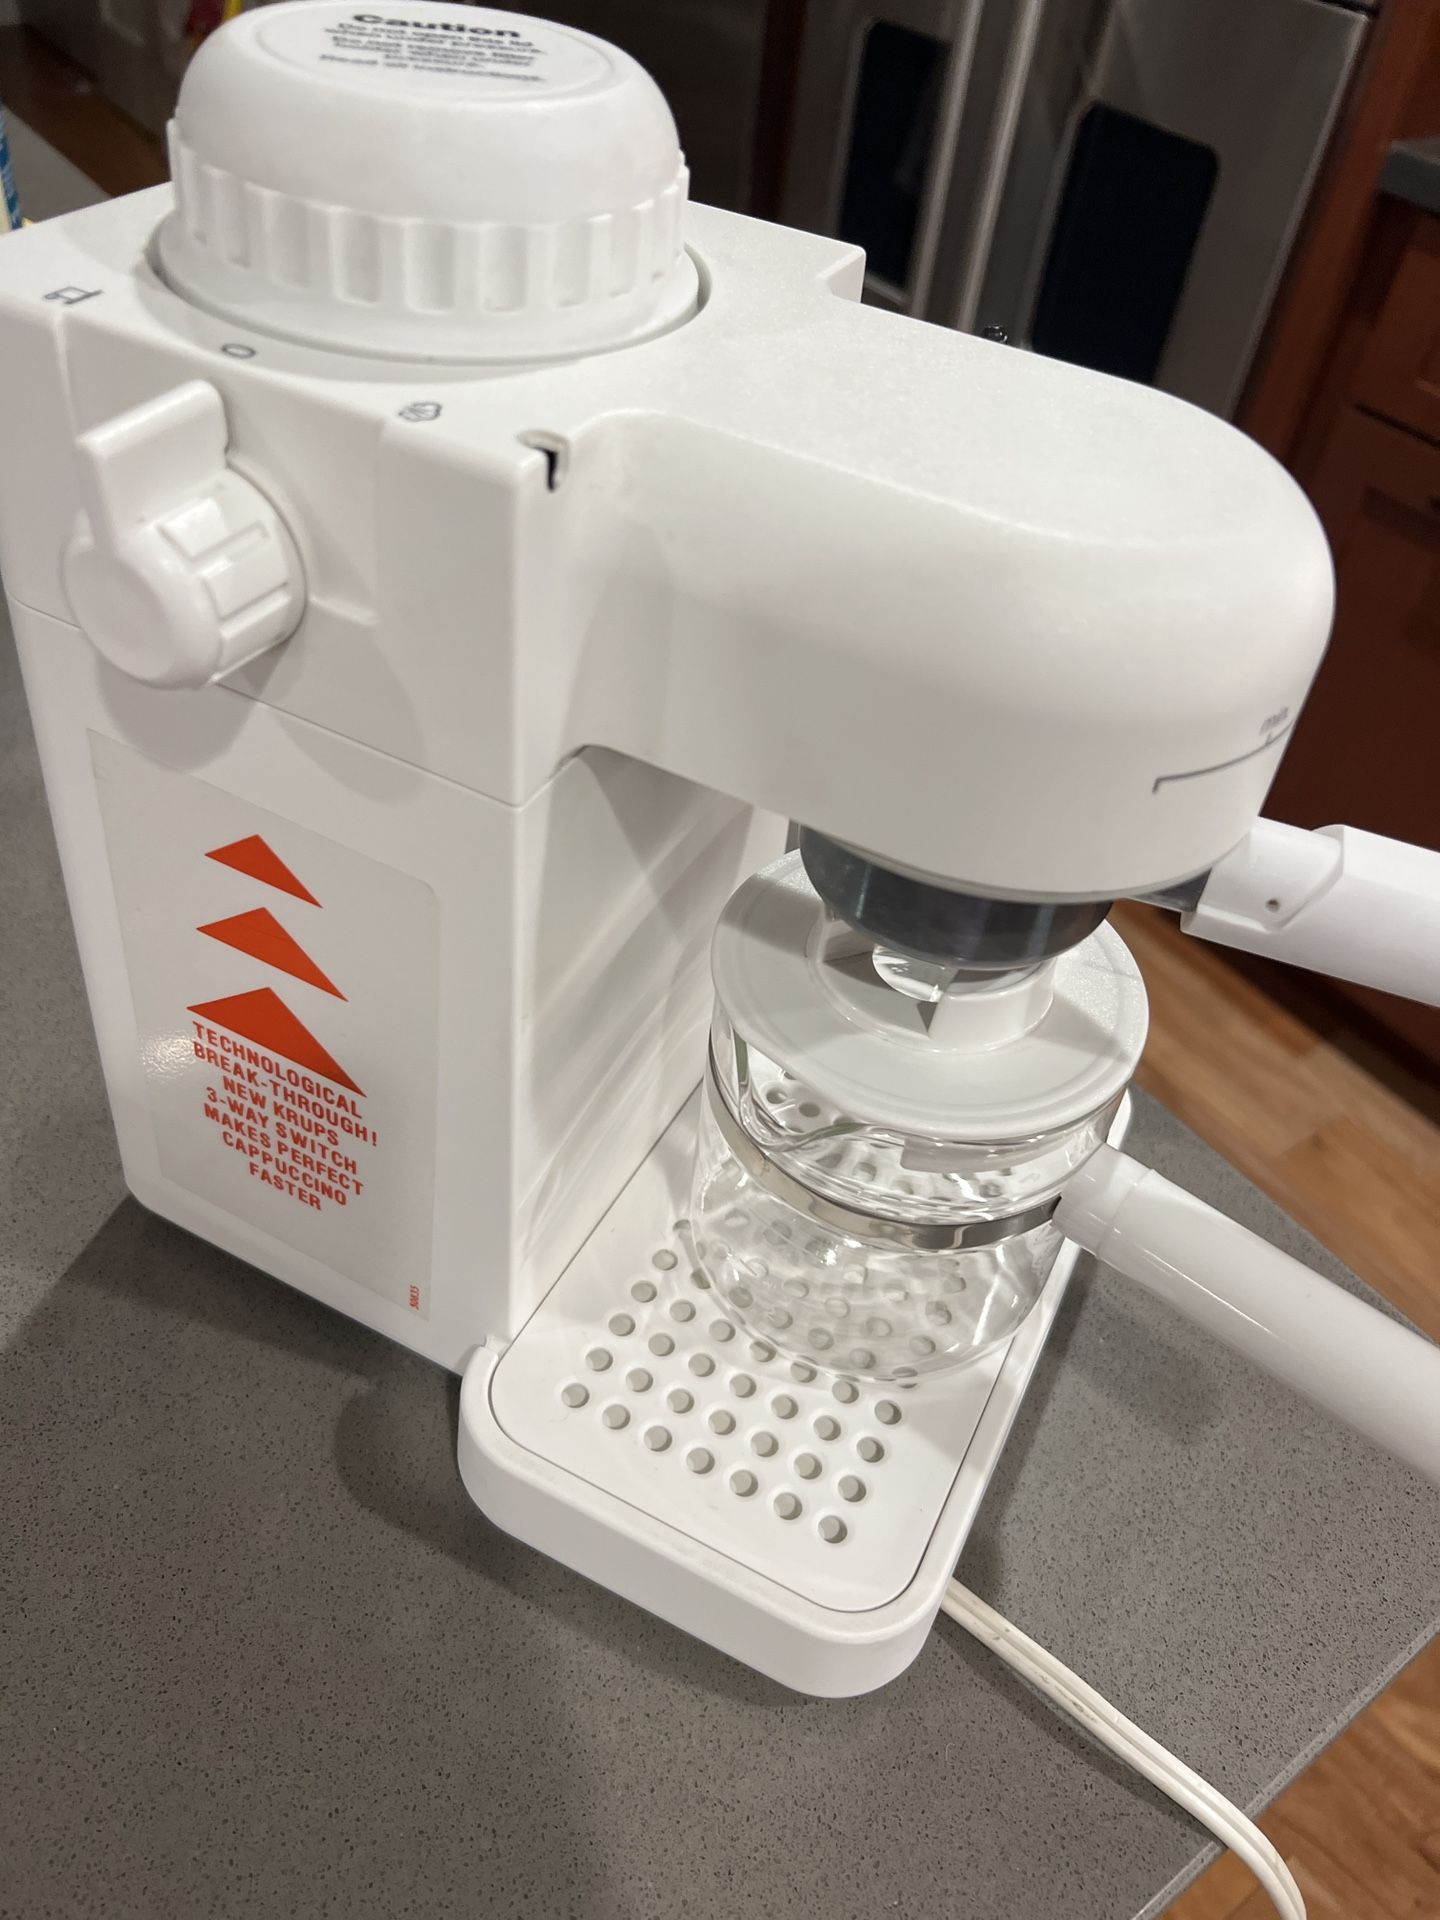 Krups espresso machine for Sale in Fort Myers, FL - OfferUp